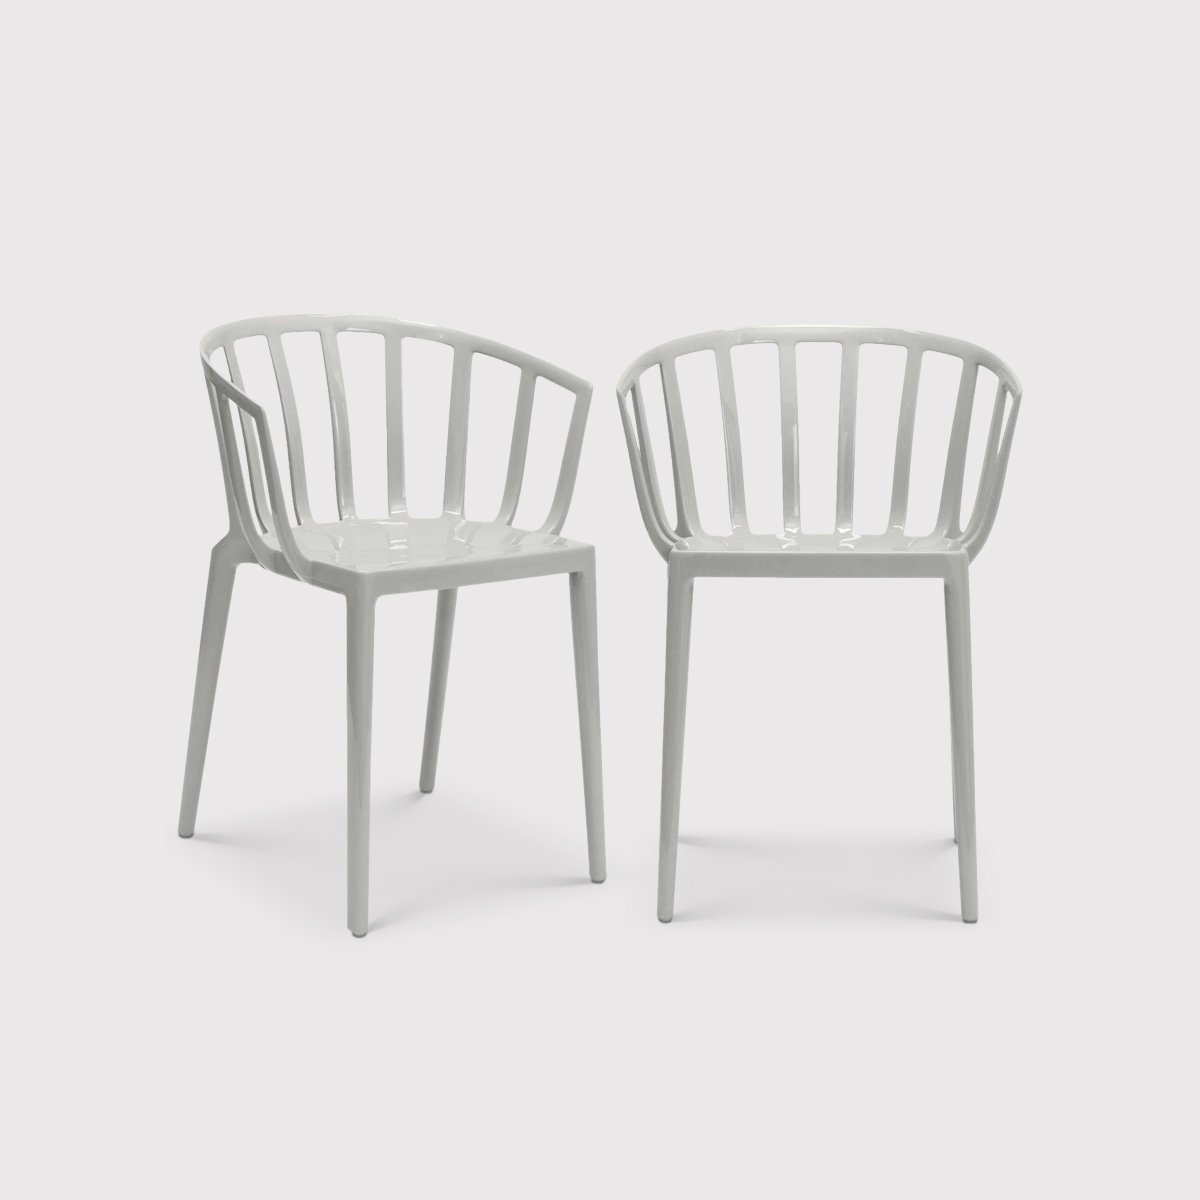 Pair of Kartell Venice Dining Chairs, Grey | Kartell